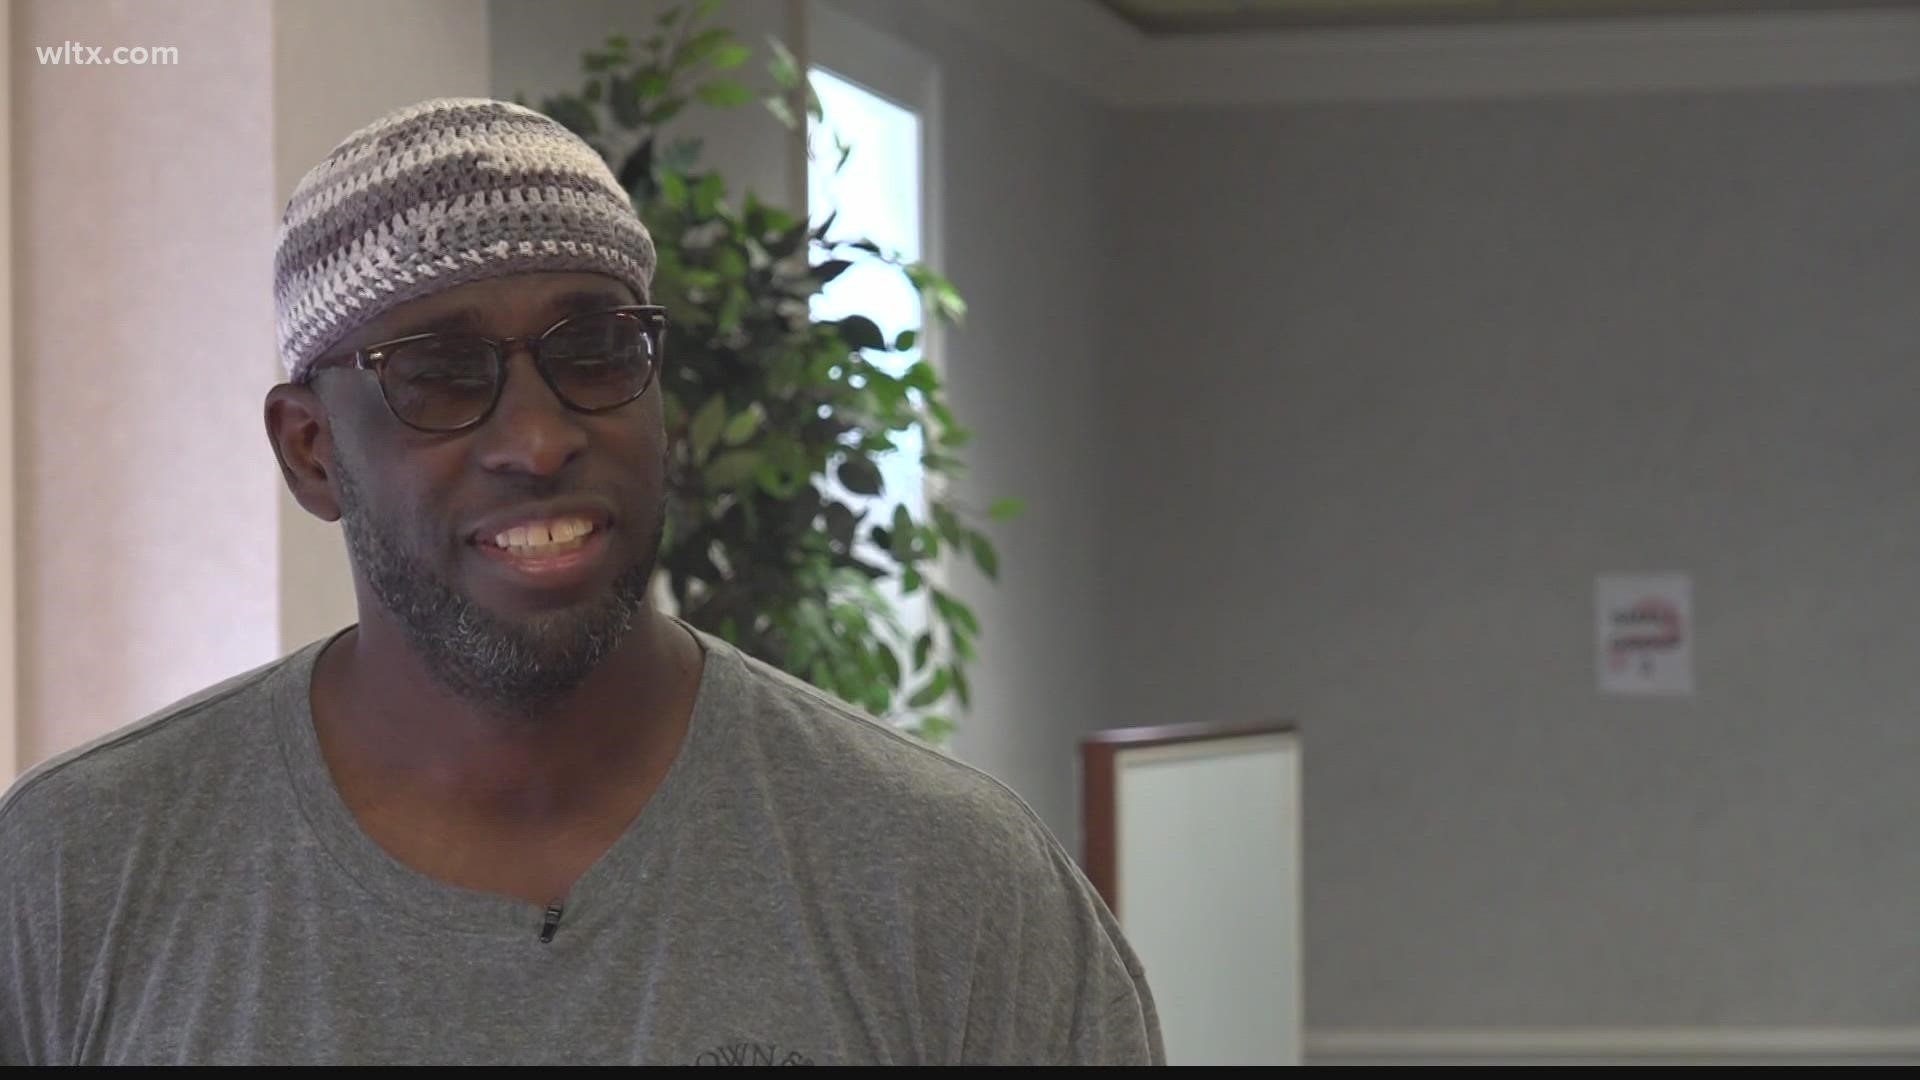 The Clean Slate Reentry Program helps formerly incarcerated men reenter society. One of the program's members just received donations to give him a second chance.